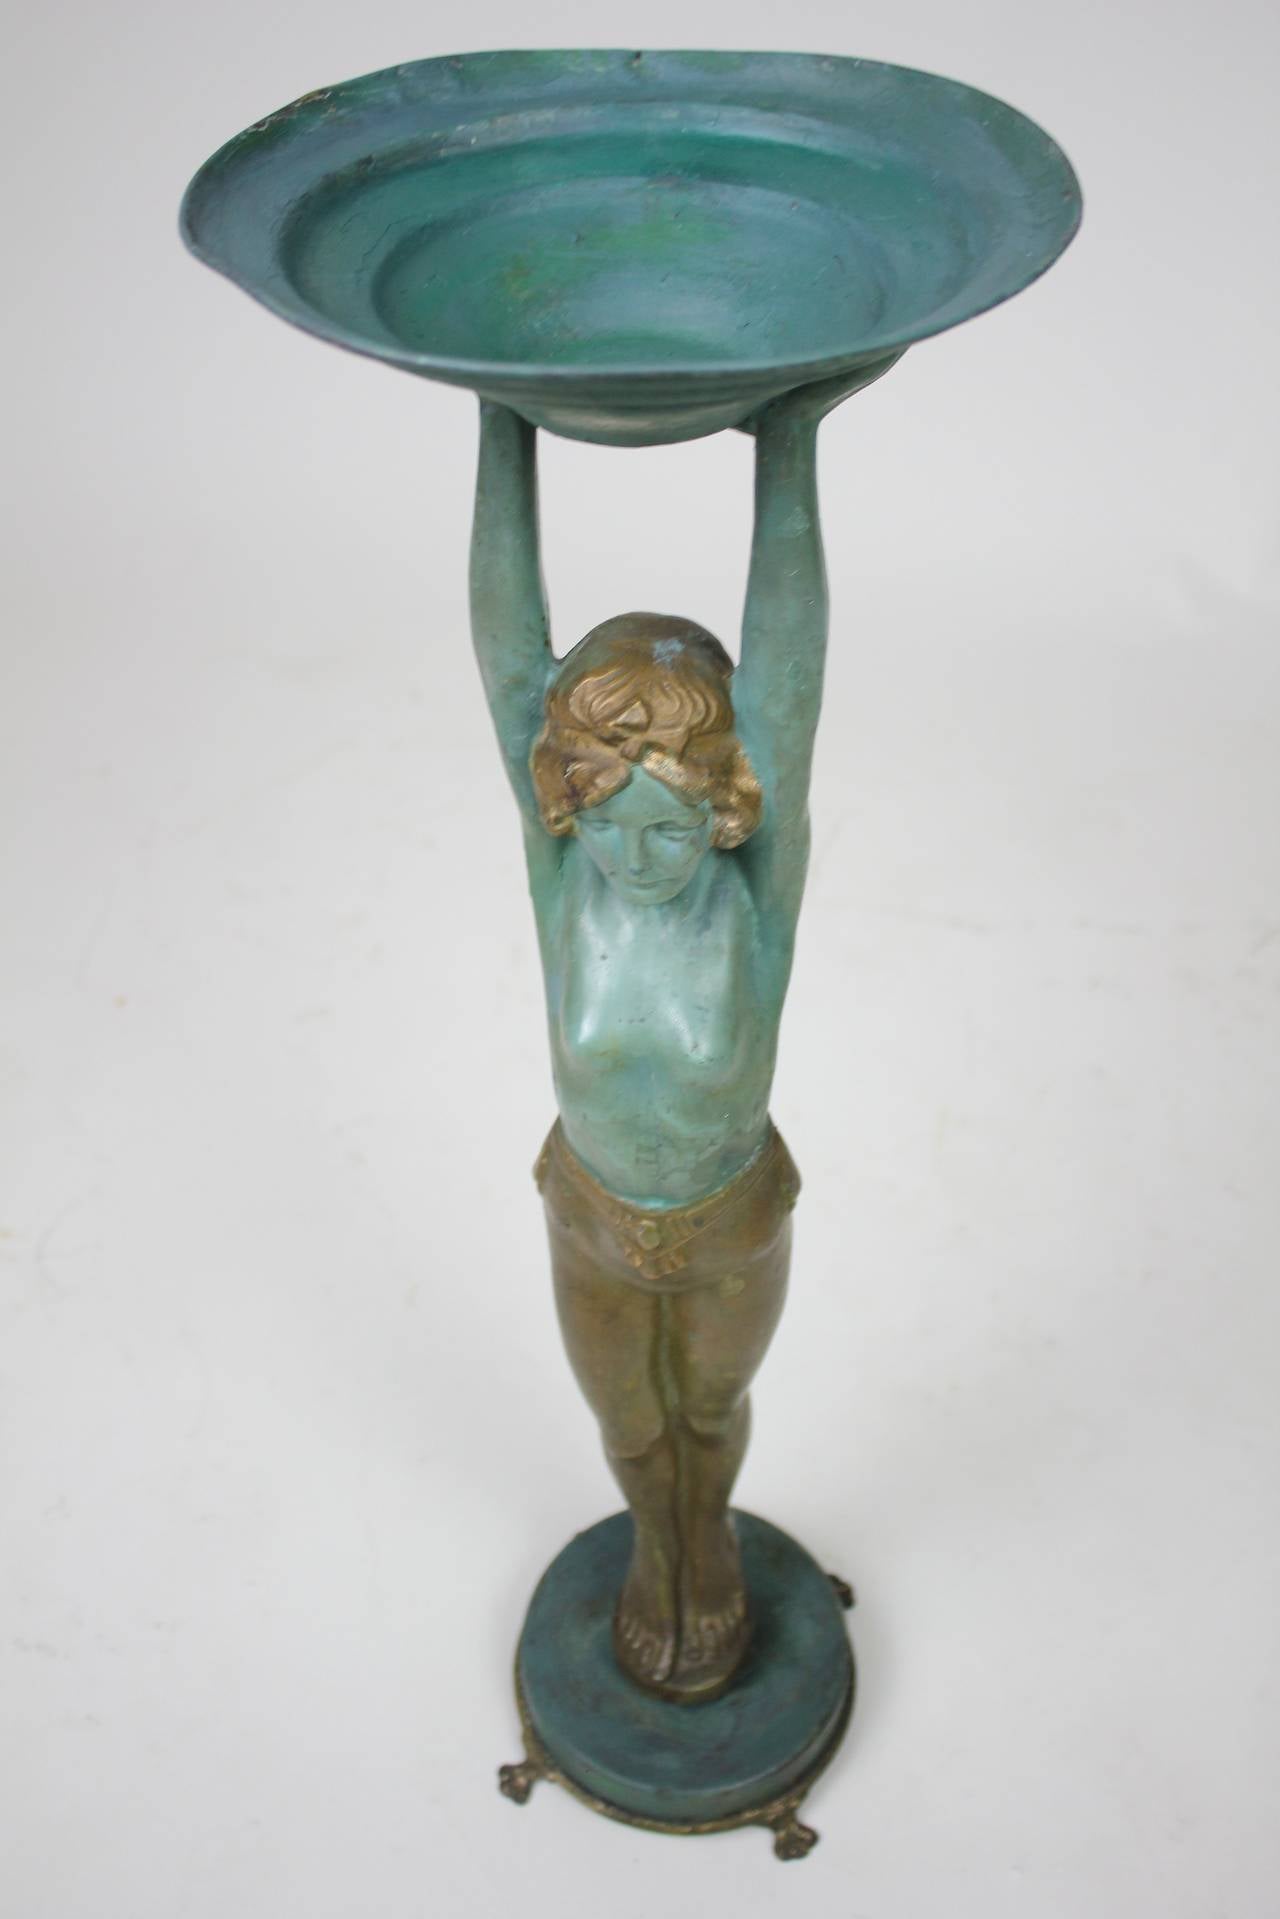 An artful mixed metal Art Deco Lady holding, with arms raised, a round bowl tray aloft a round base with paw feet by Everlite of Brooklyn, New York. A creative sculpture which may have been a smoking stand, we have used in the serving of fruit or